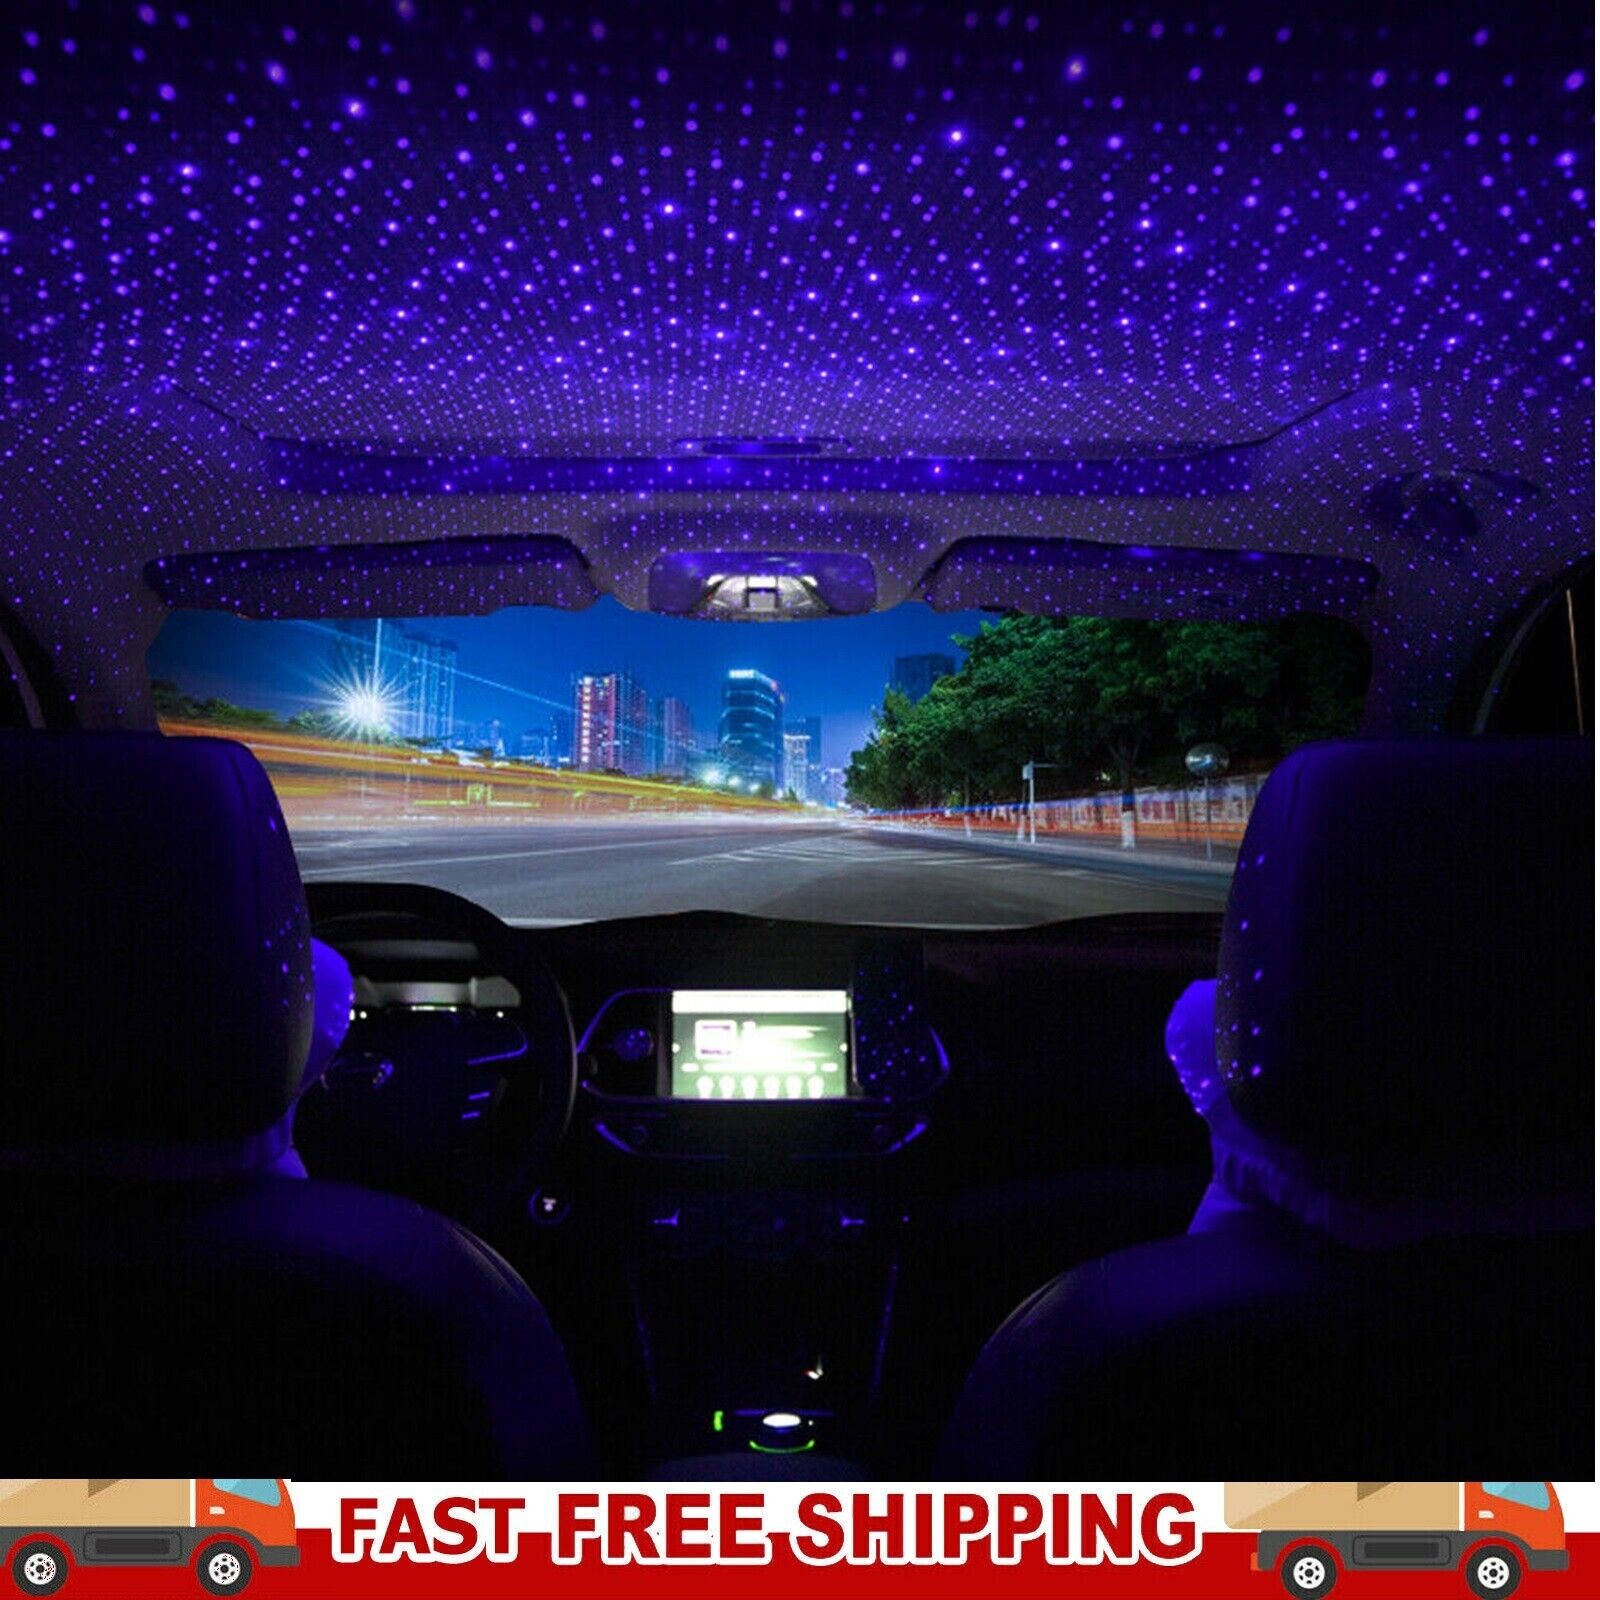 USB Car Interior Roof LED Star Light Atmosphere Starry Sky Night Projector Lamp